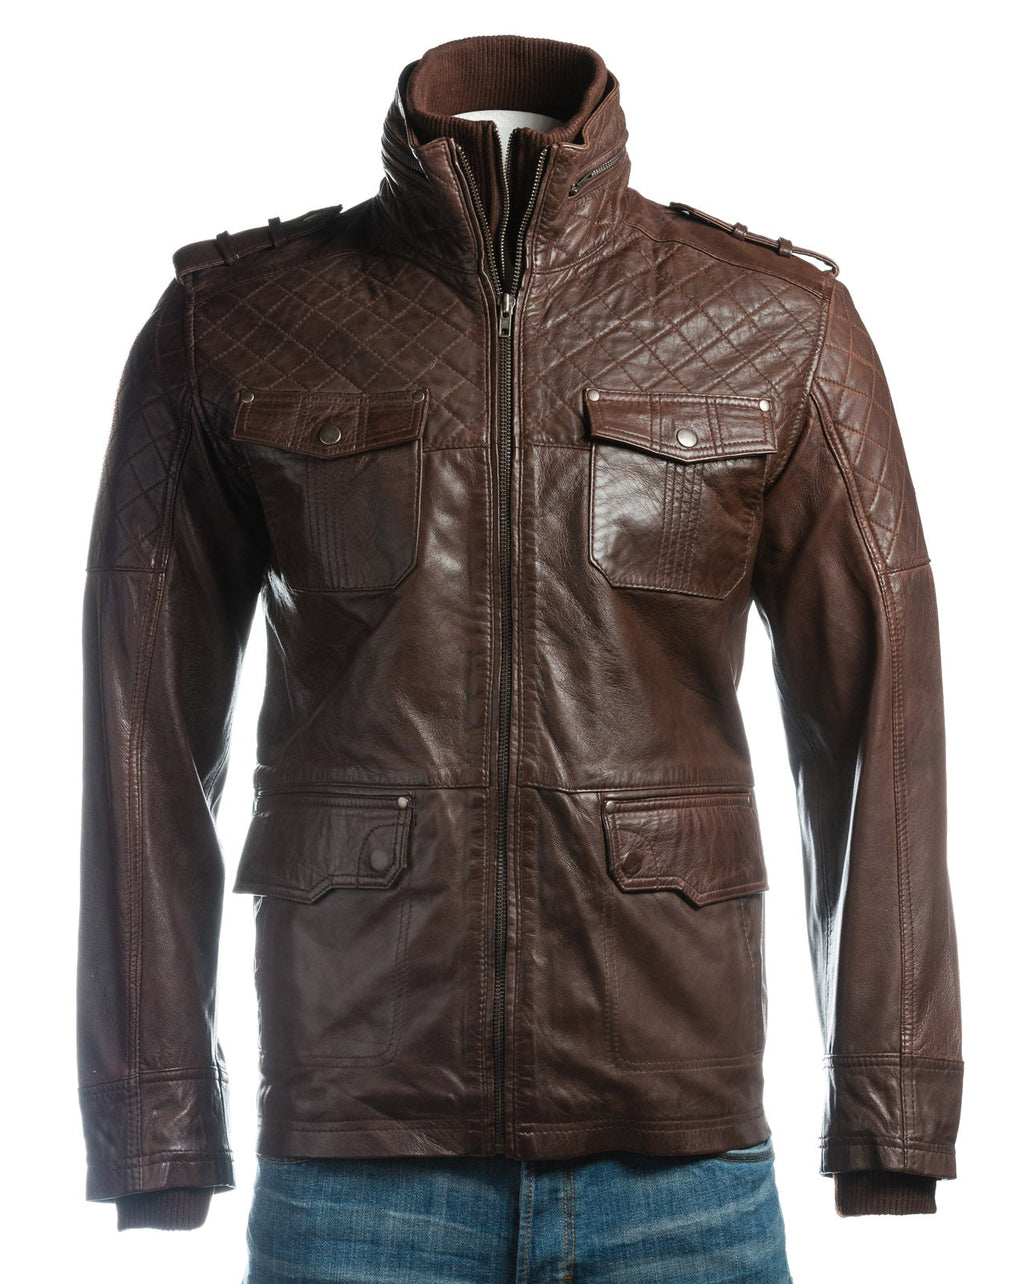 Men's Brown Mid Length Leather Jacket With Double Collar Shoulder Stitch Detail: Orlando